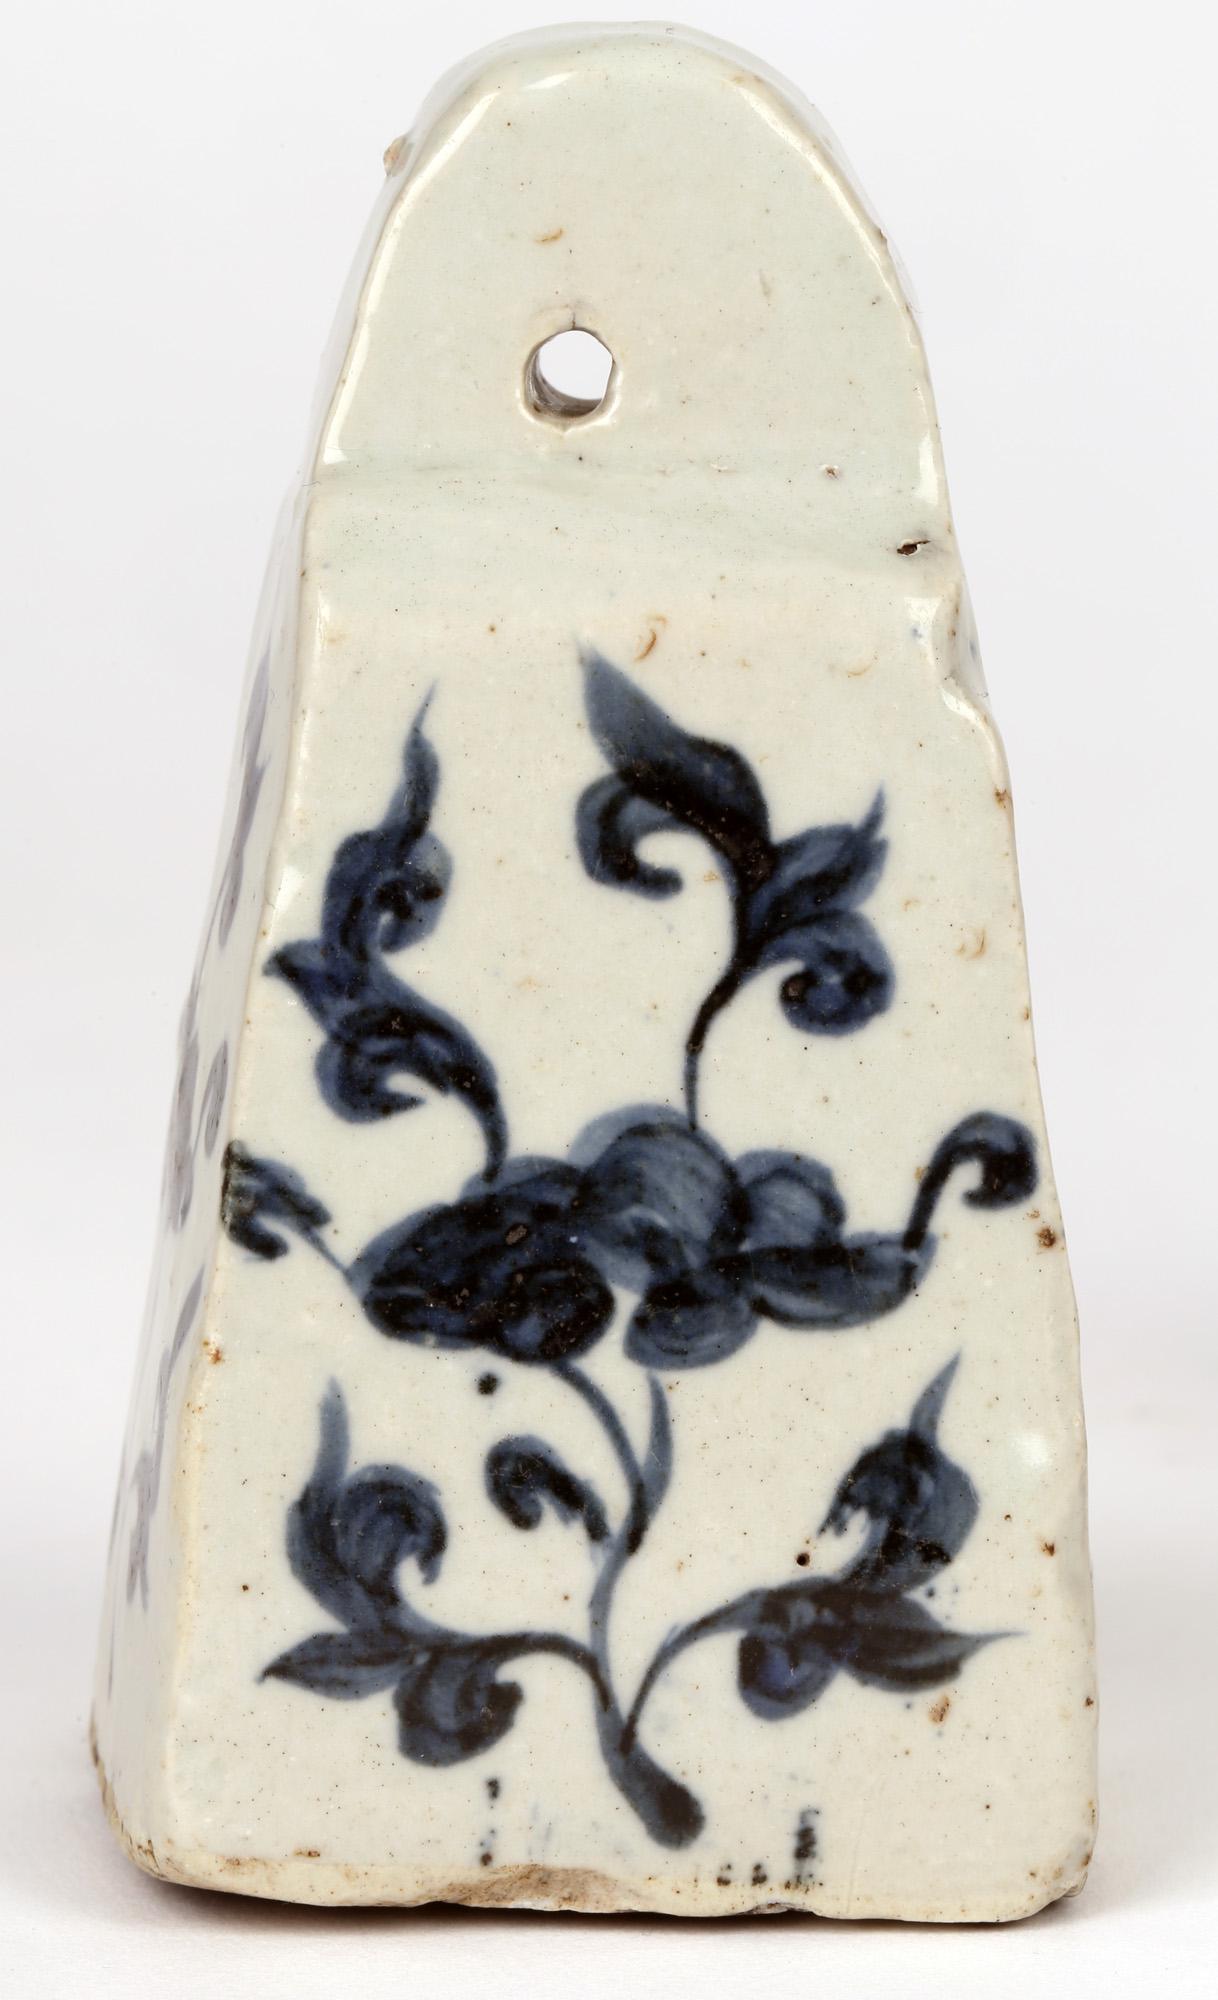 Two Chinese Blue & White under glazed porcelain weights in the Yuan (1279-1368) style but probably later. The weights are of tapered square-section shape with a rounded pierced top with a suspension hole. The sides are hand painted with stylized